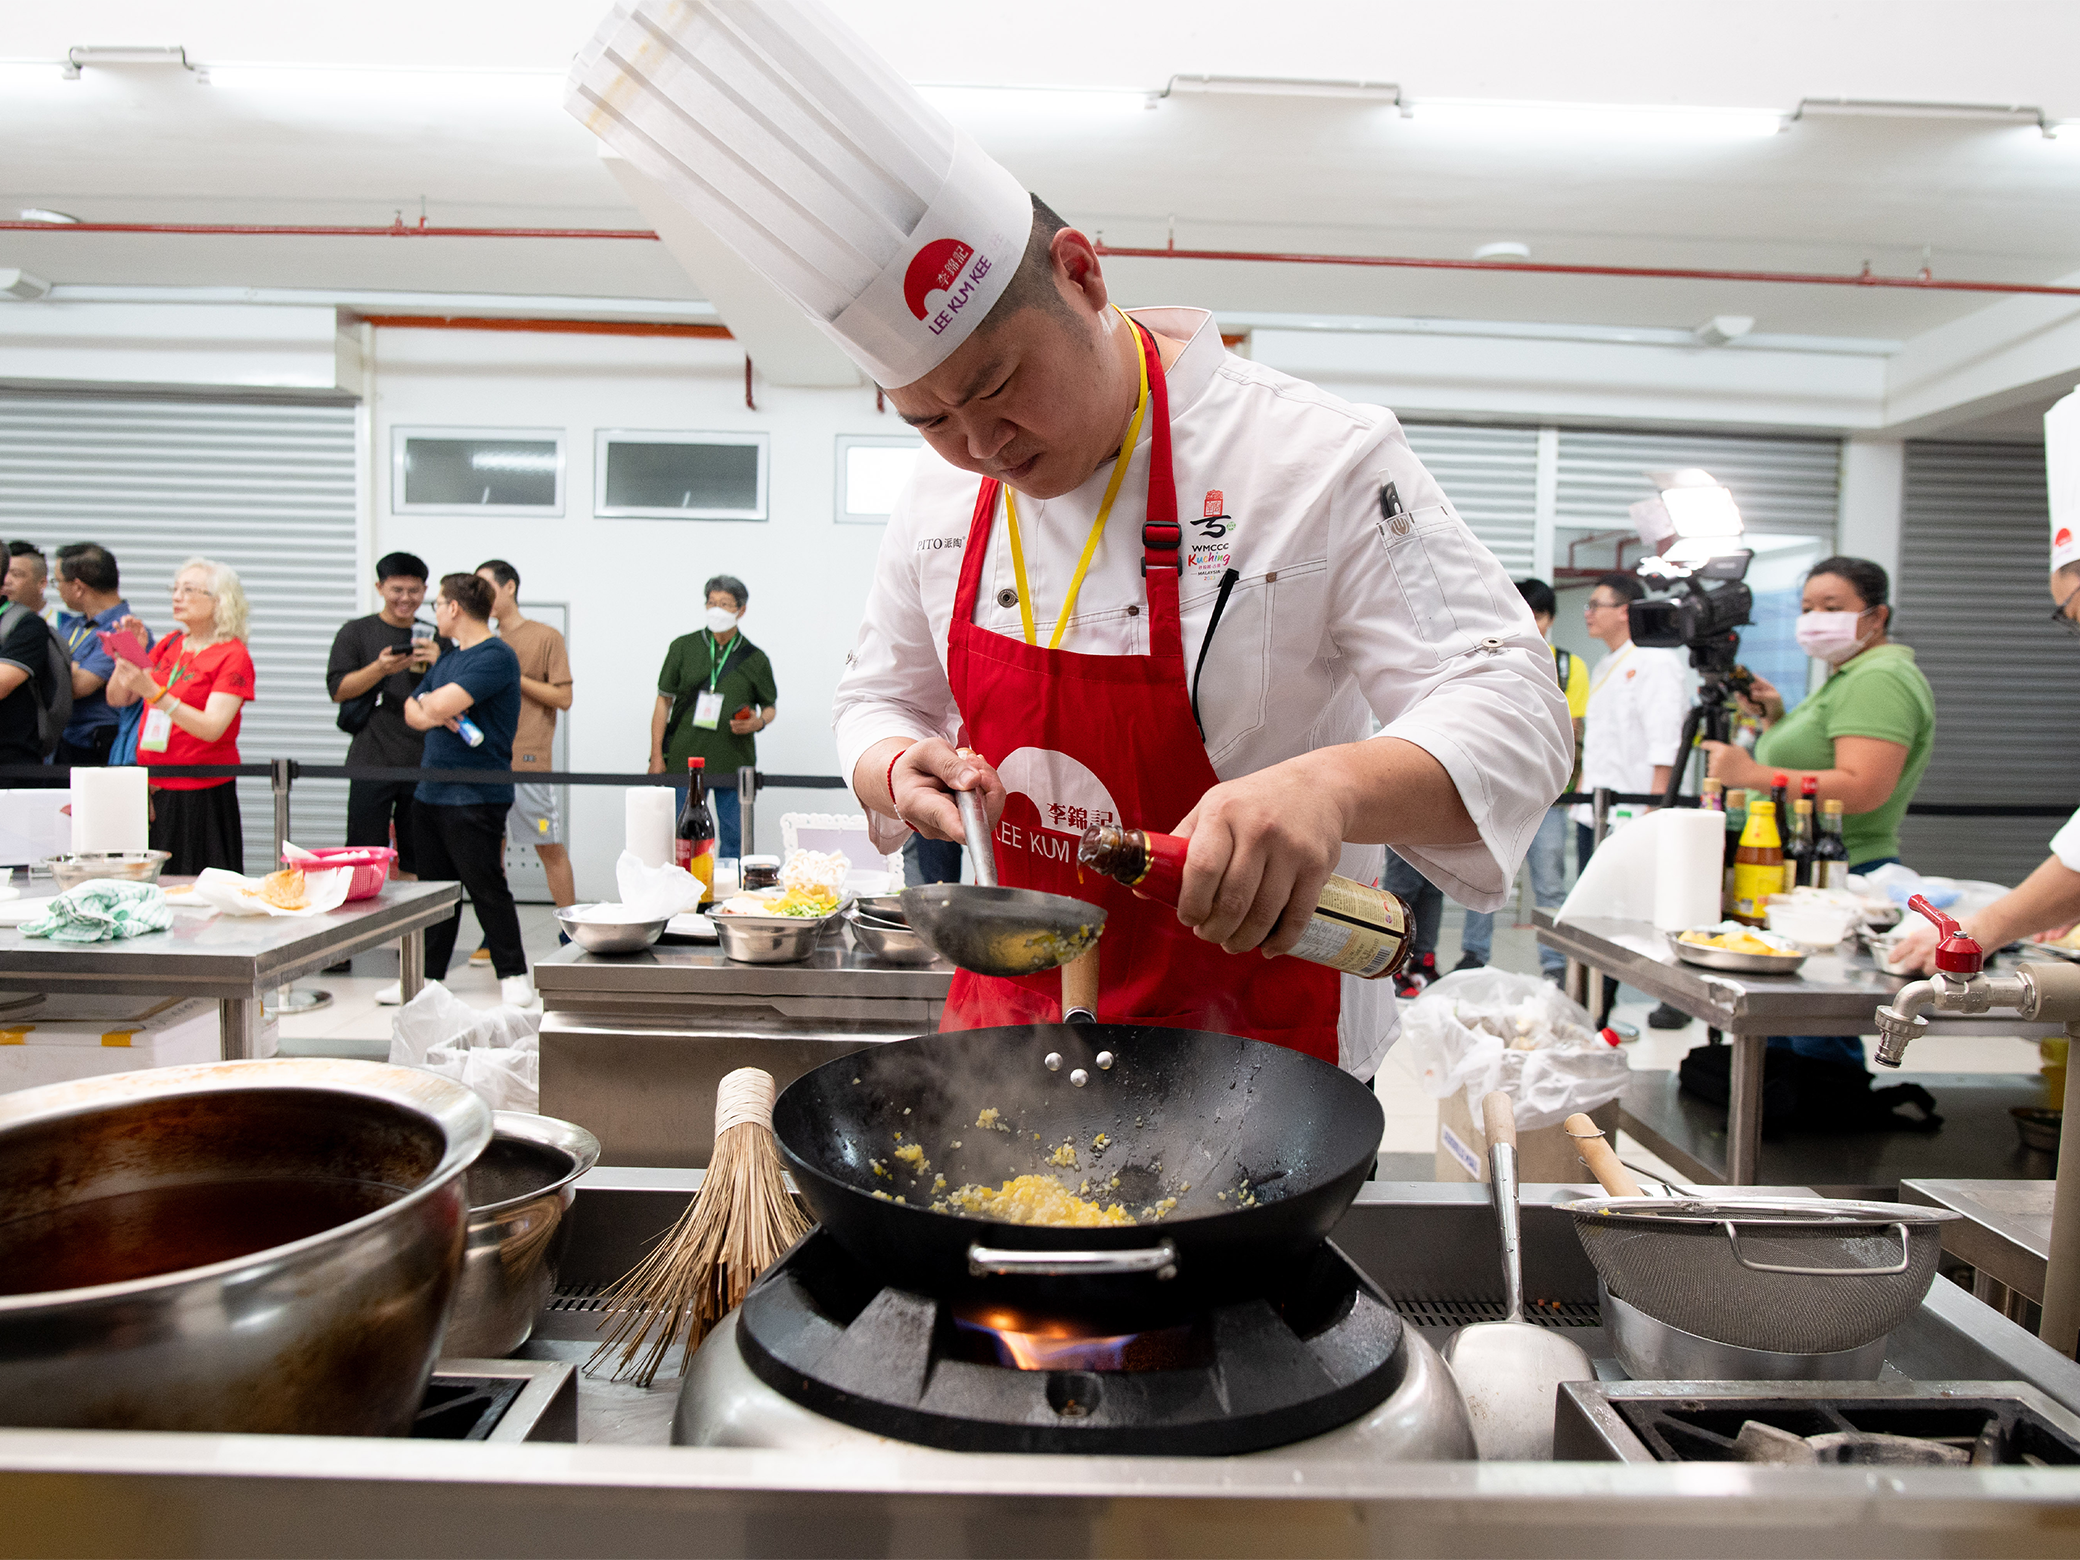 Competitors showcase their remarkable talent in crafting innovative Cantonese dishes with Lee Kum Kee sauces and condiments